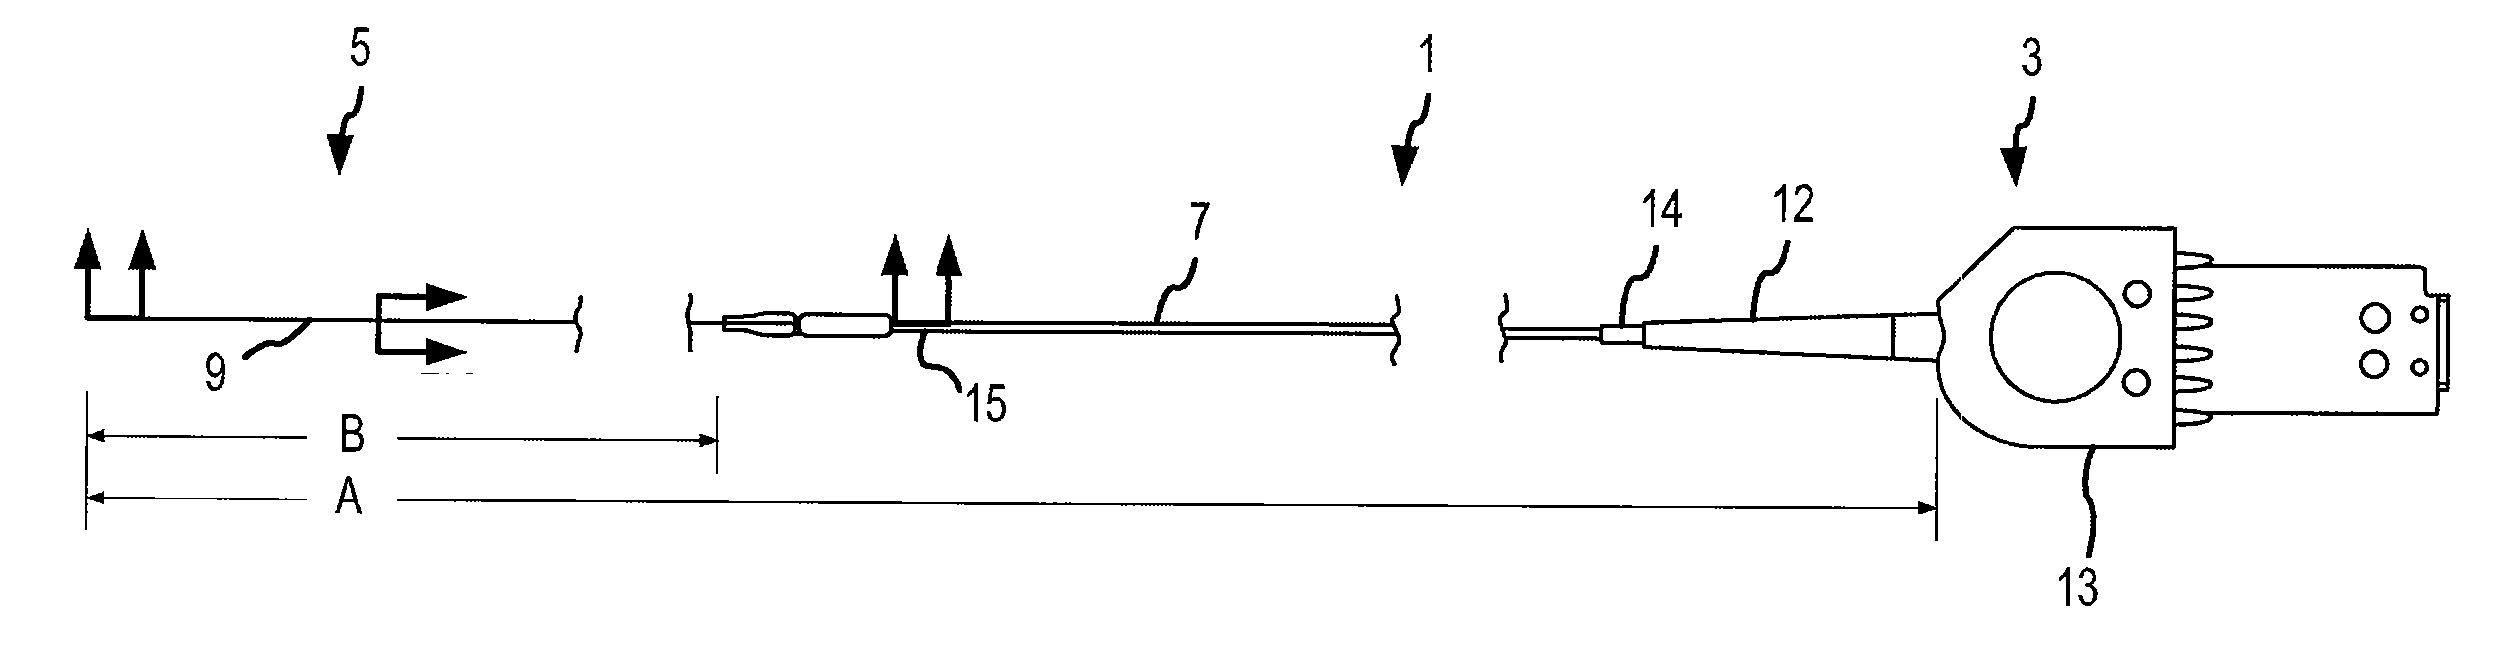 Laser-assisted guidewire having a variable stiffness shaft